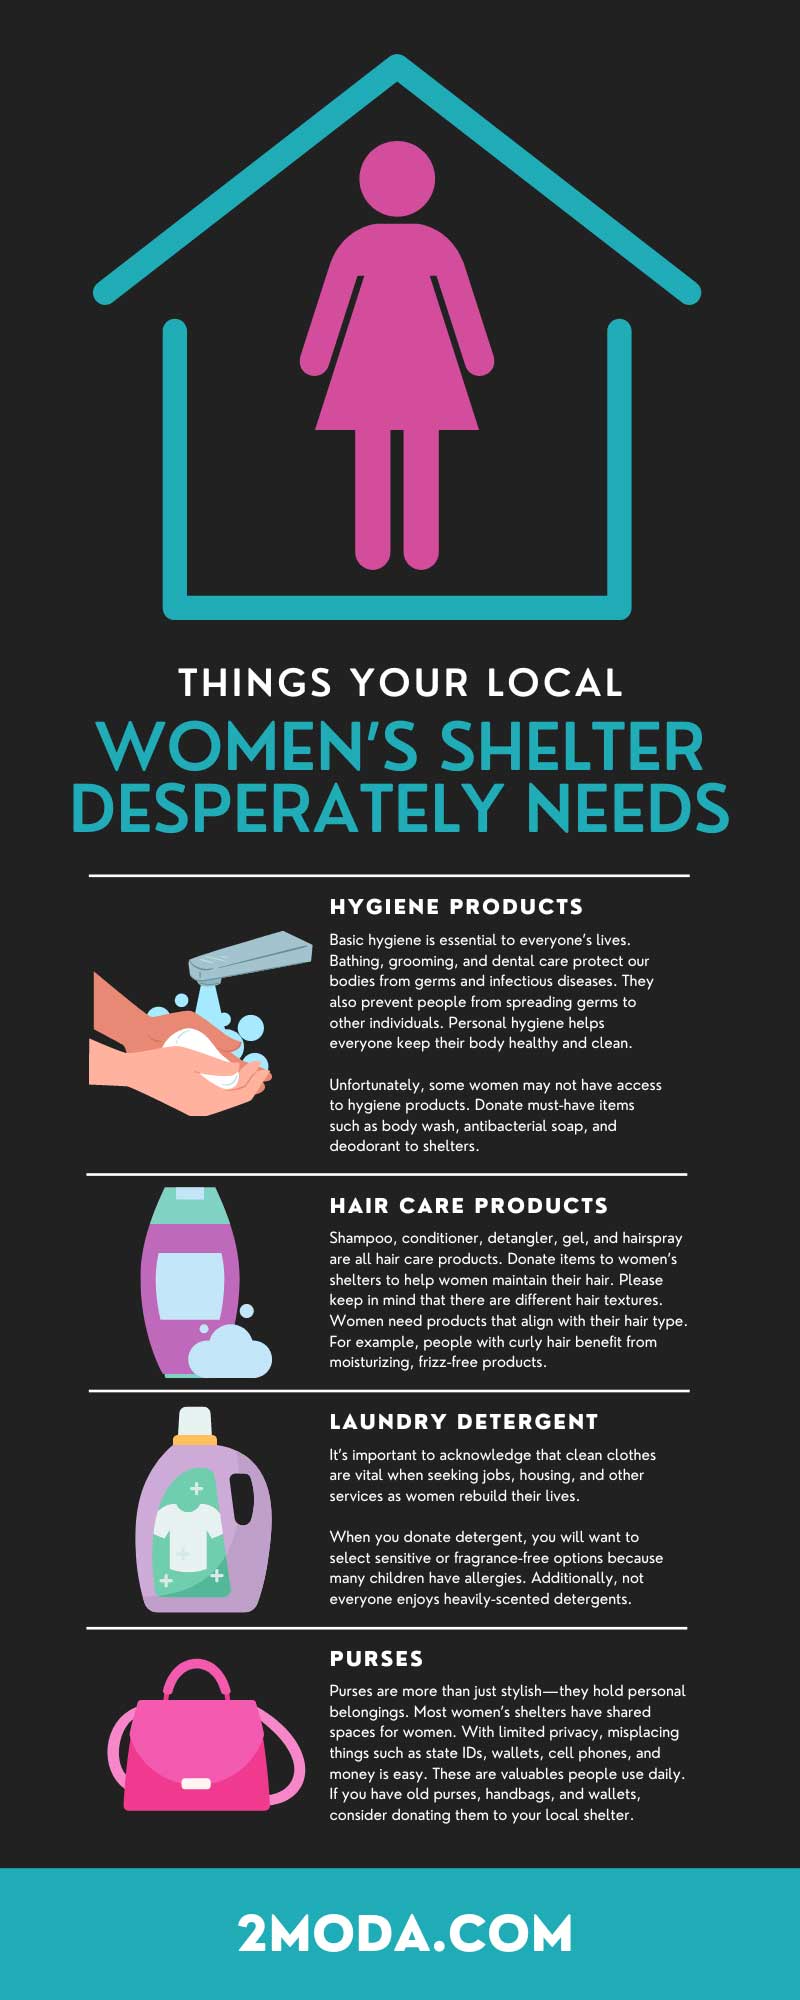 12 Things Your Local Women’s Shelter Desperately Needs